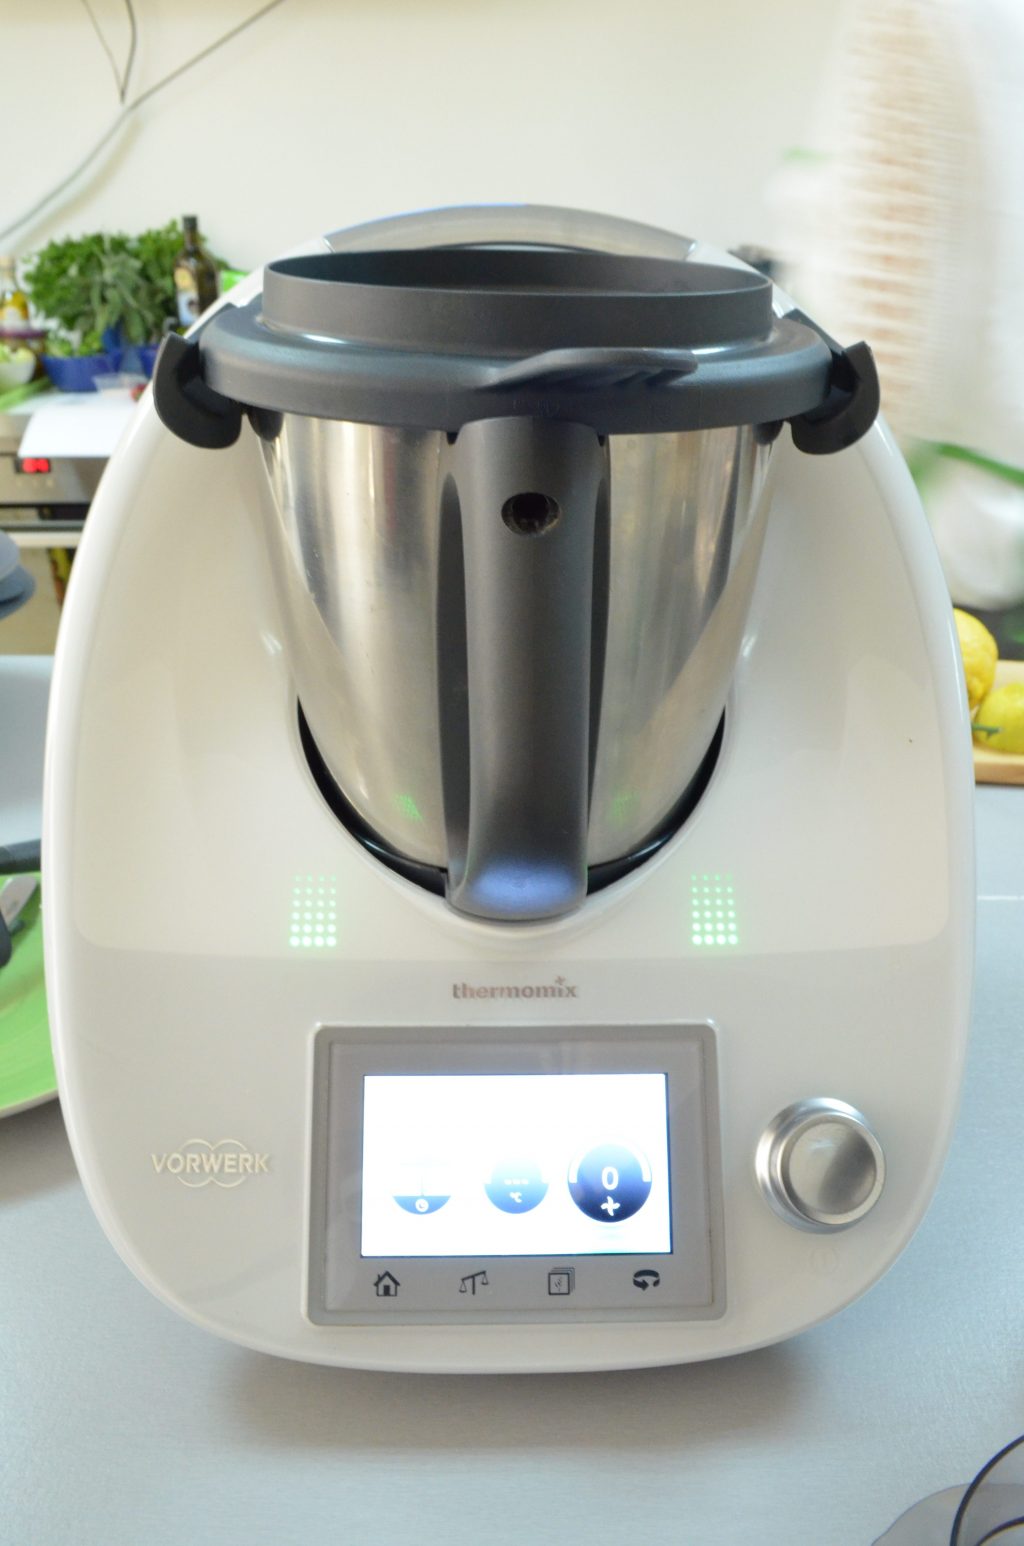 Thermomix |The beast (that comes with a recipe book btw!)